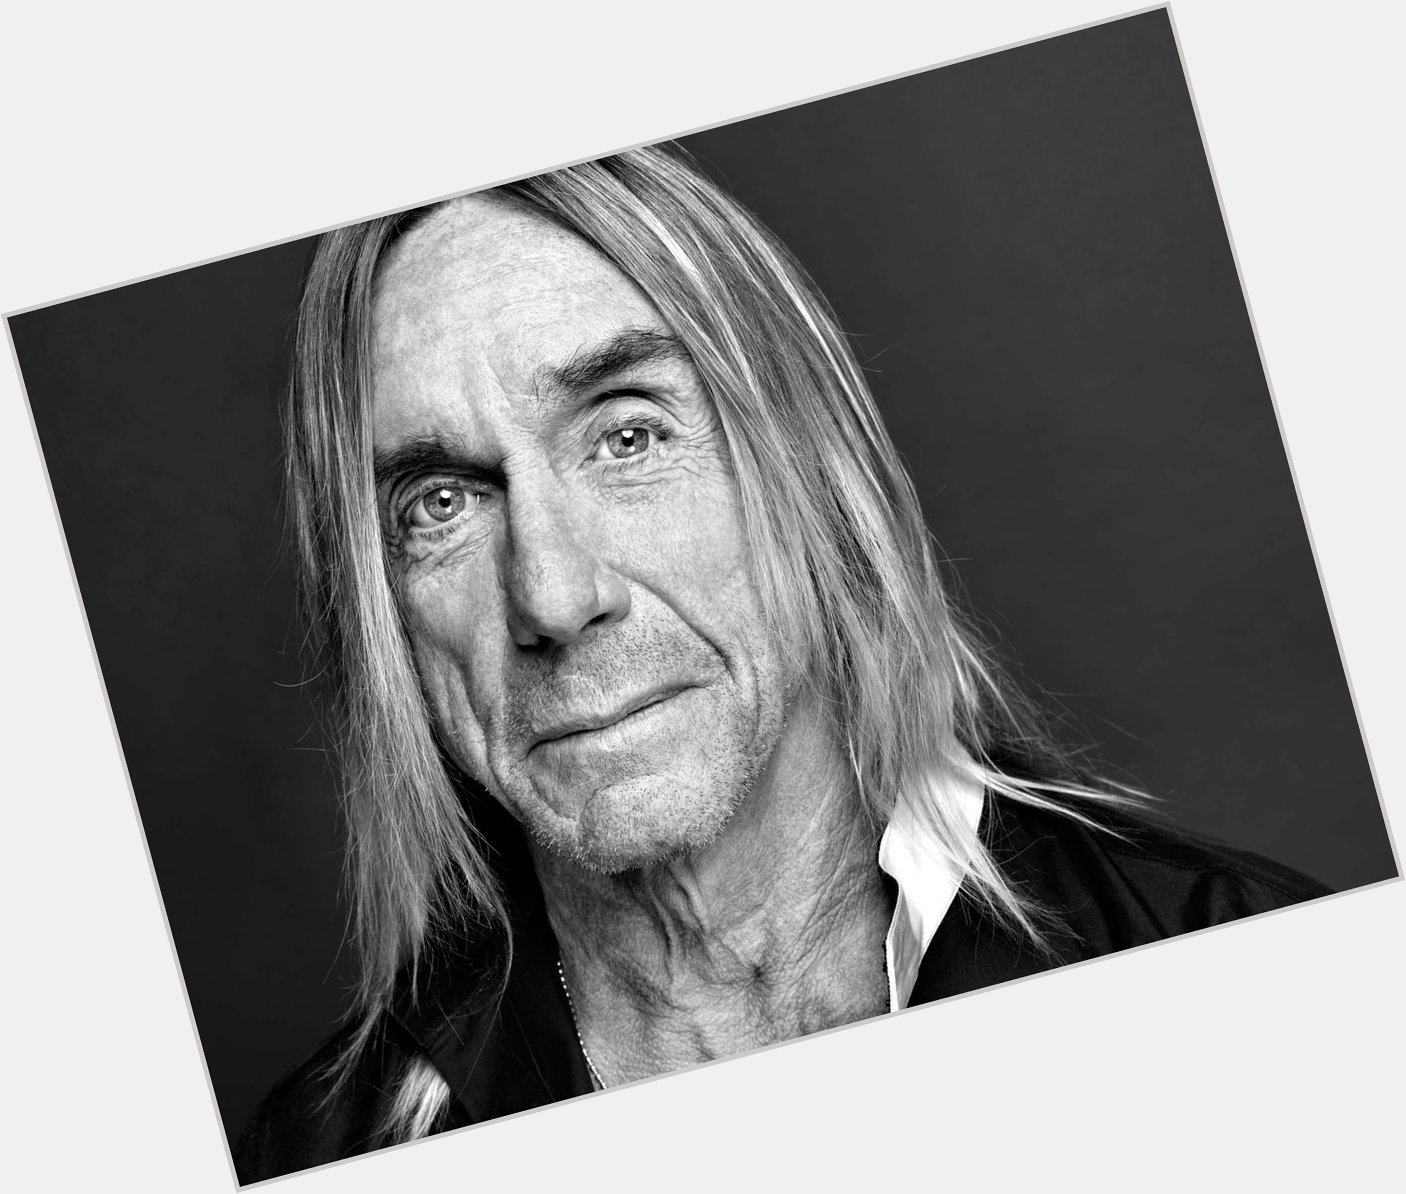 Happy birthday to Rock and Roll Hall of Famer, Iggy Pop! 